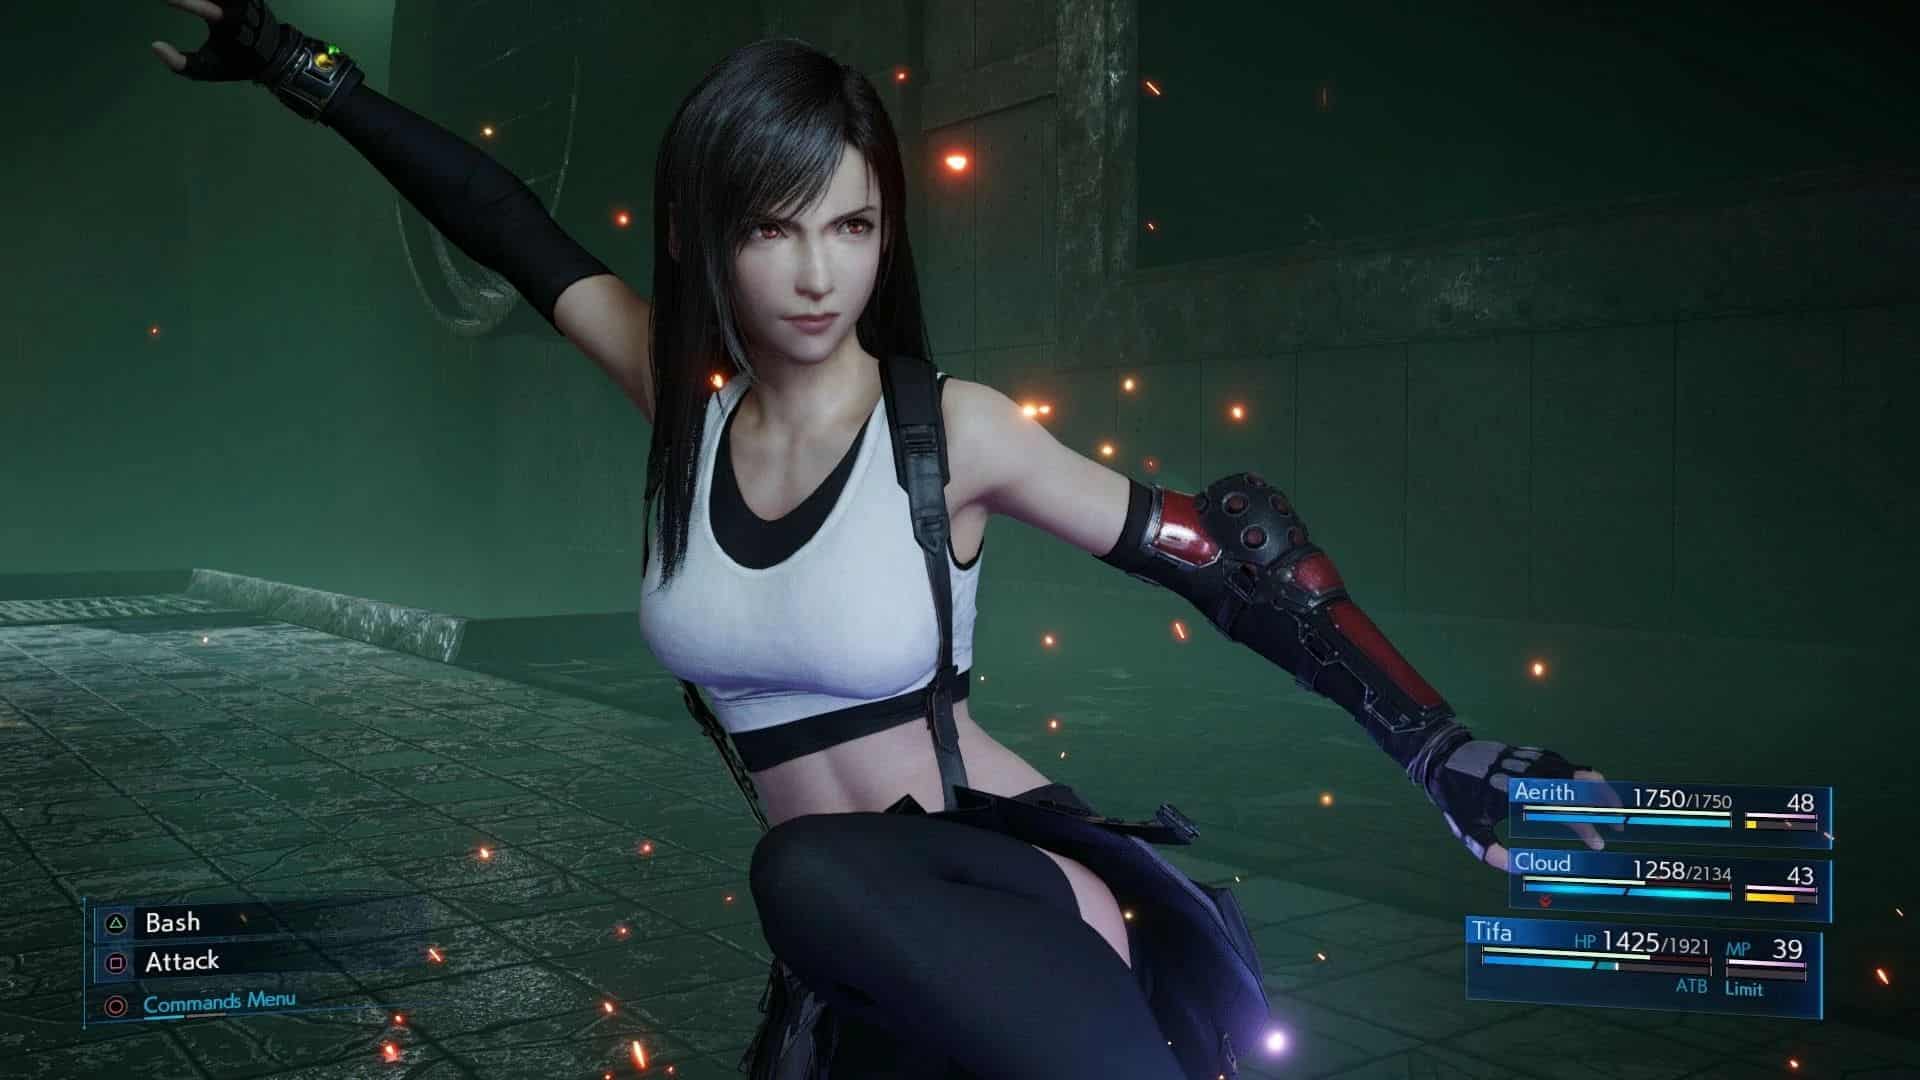 Final Fantasy VII Remake surprise patch adds more clothes to Tifa - Dexerto